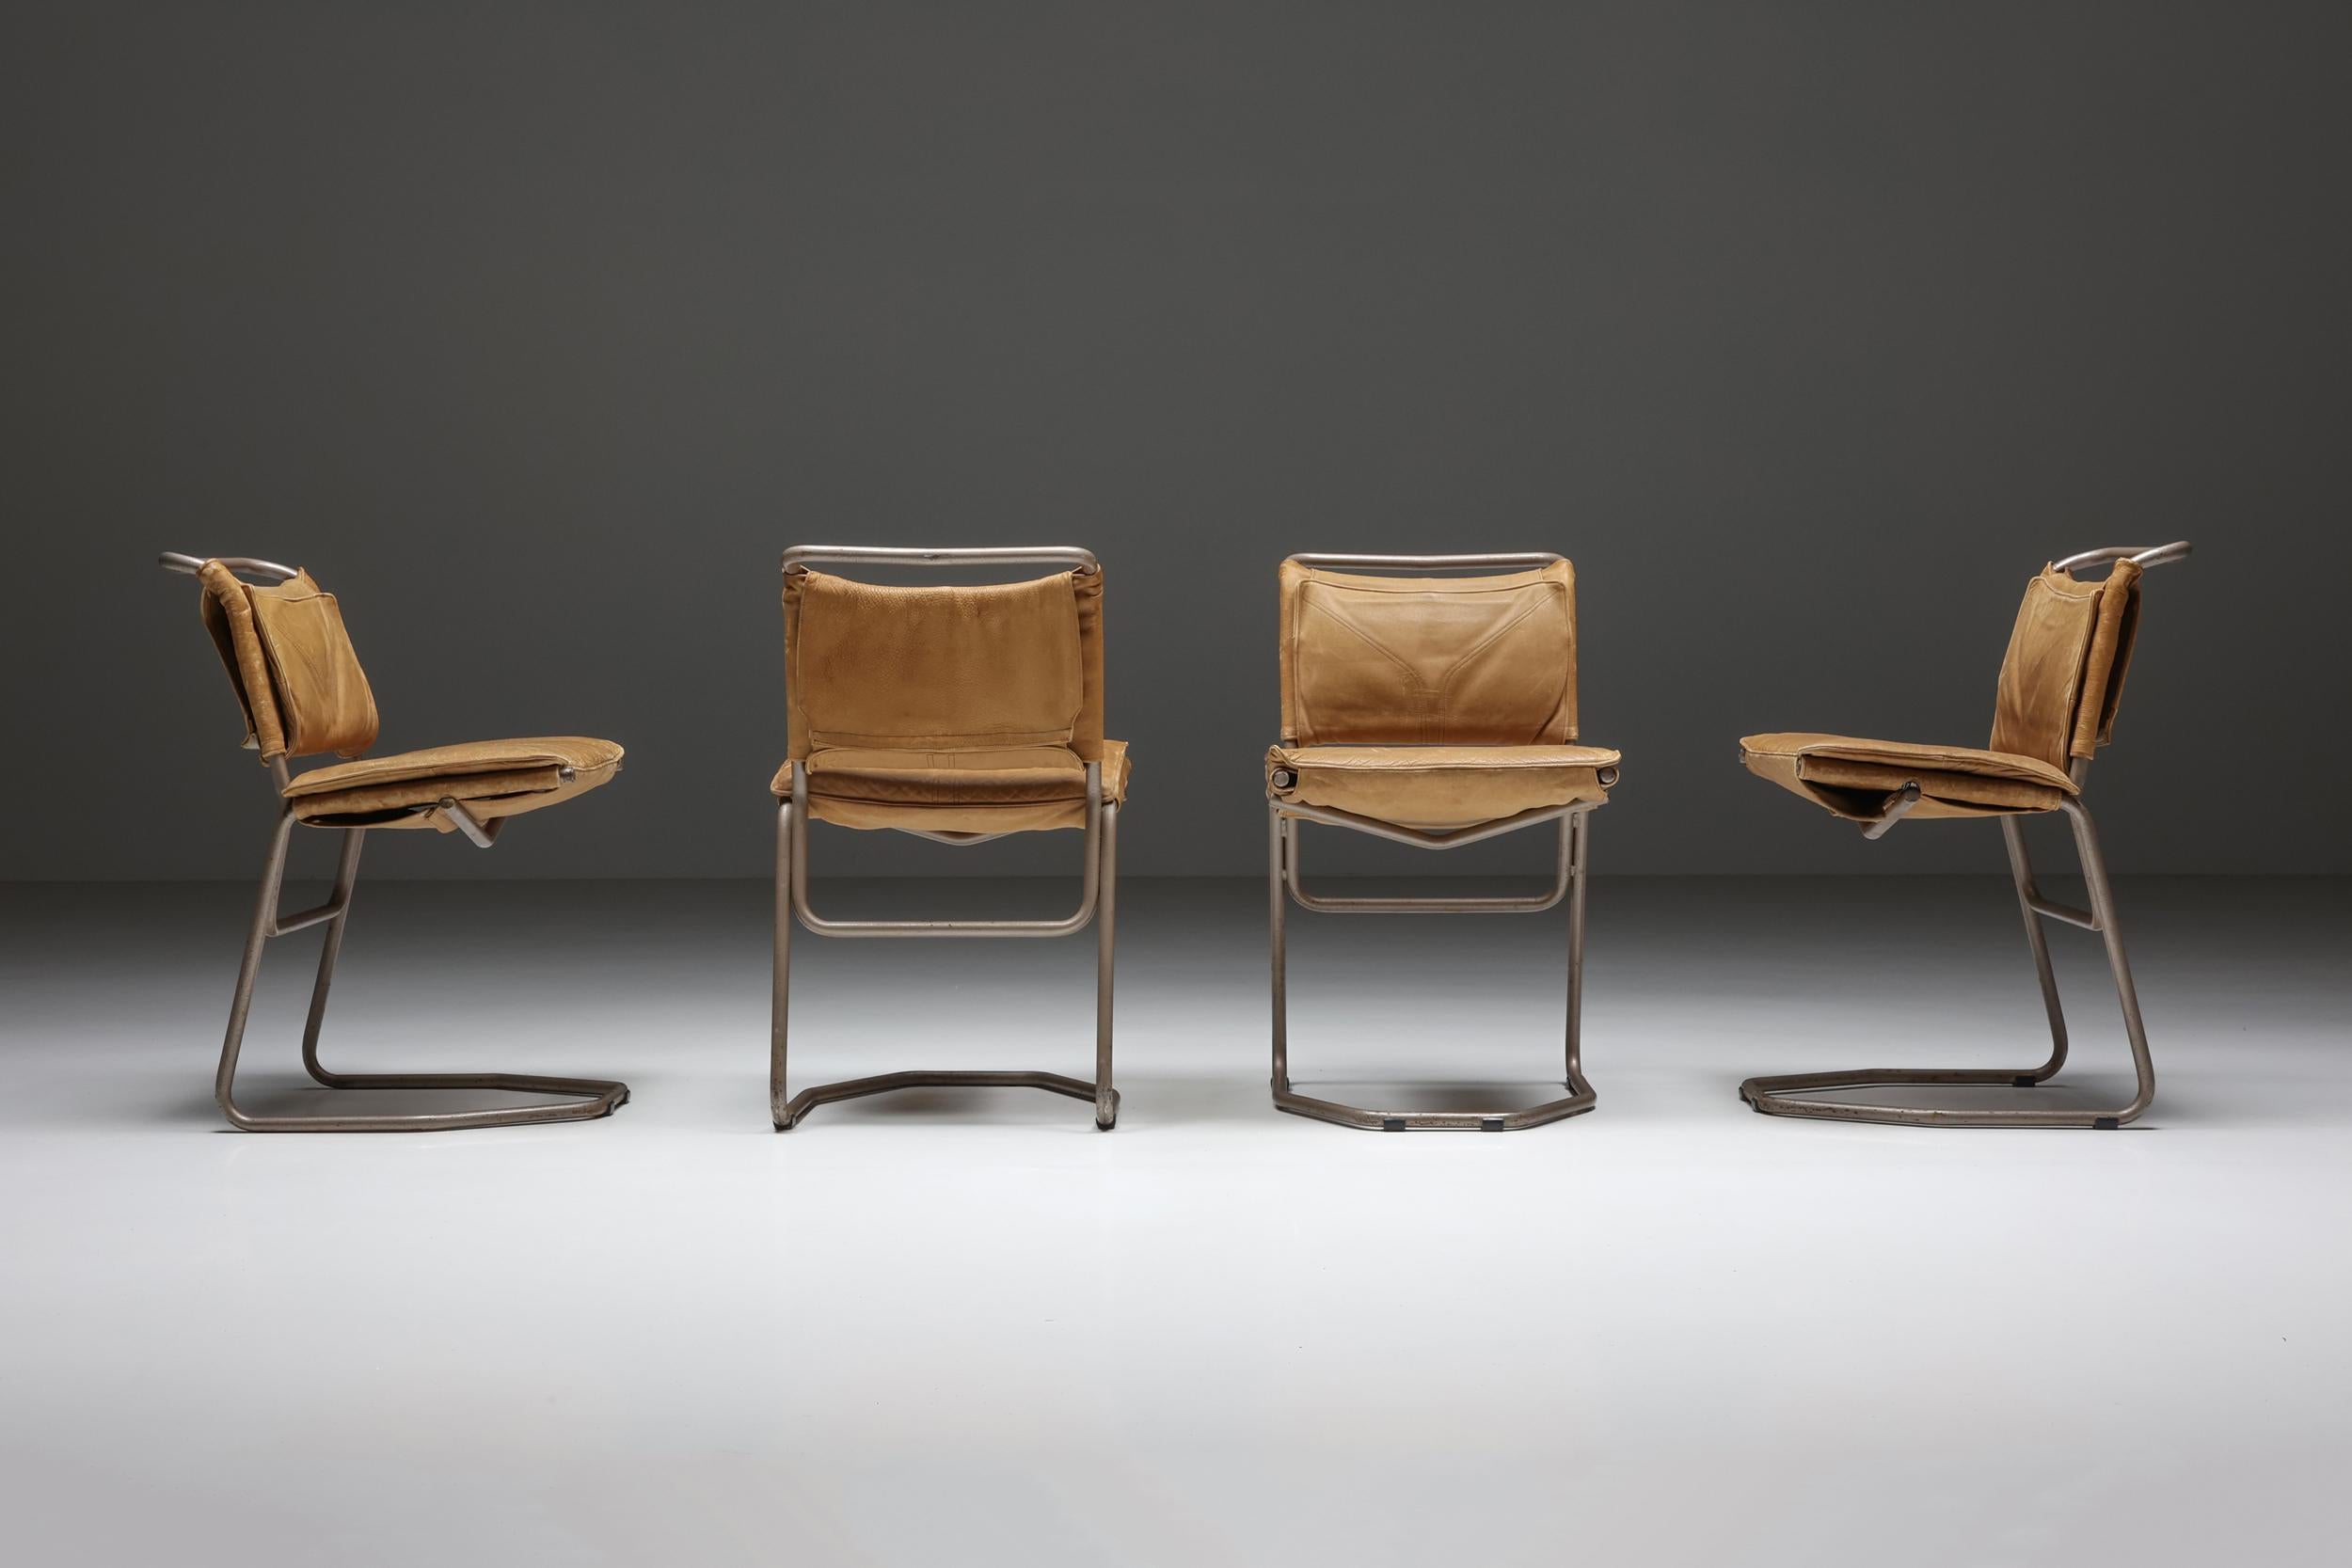 Belgian Steel and Cognac Dining Chairs by Raymond Rombouts, Belgium, 20th Century For Sale